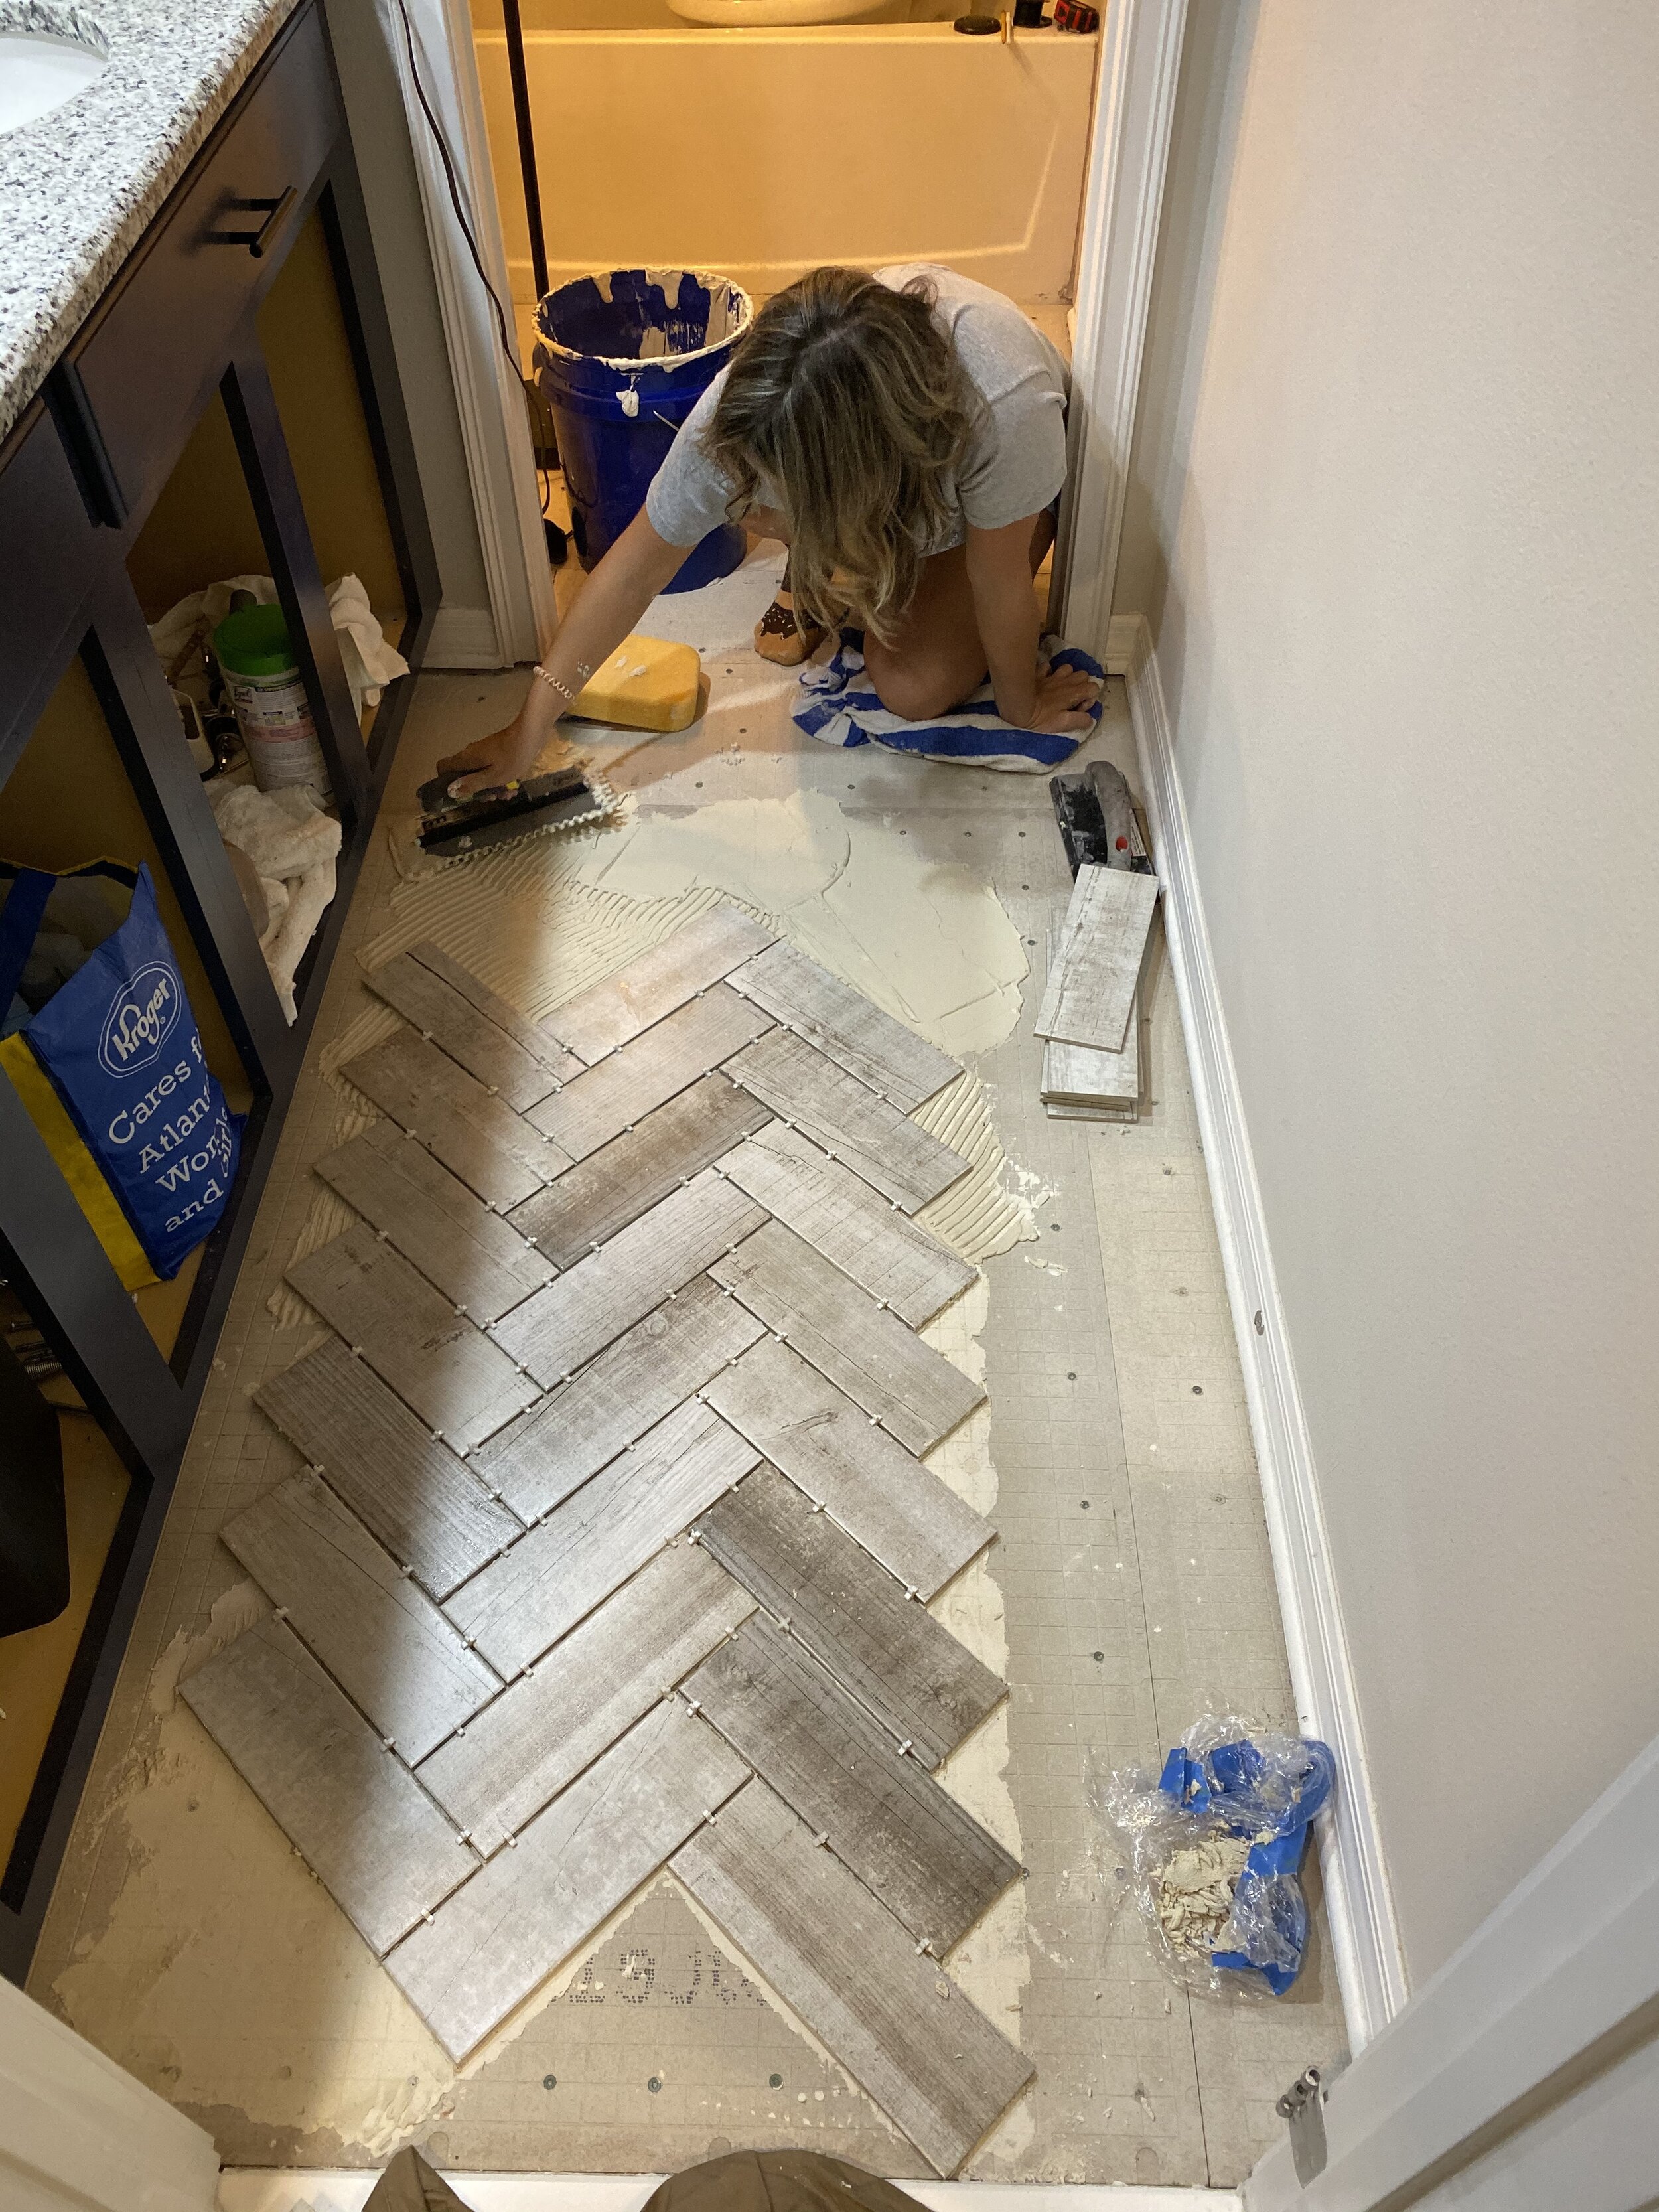 Ryan started out laying the tile, but I took over and did the entire floor!